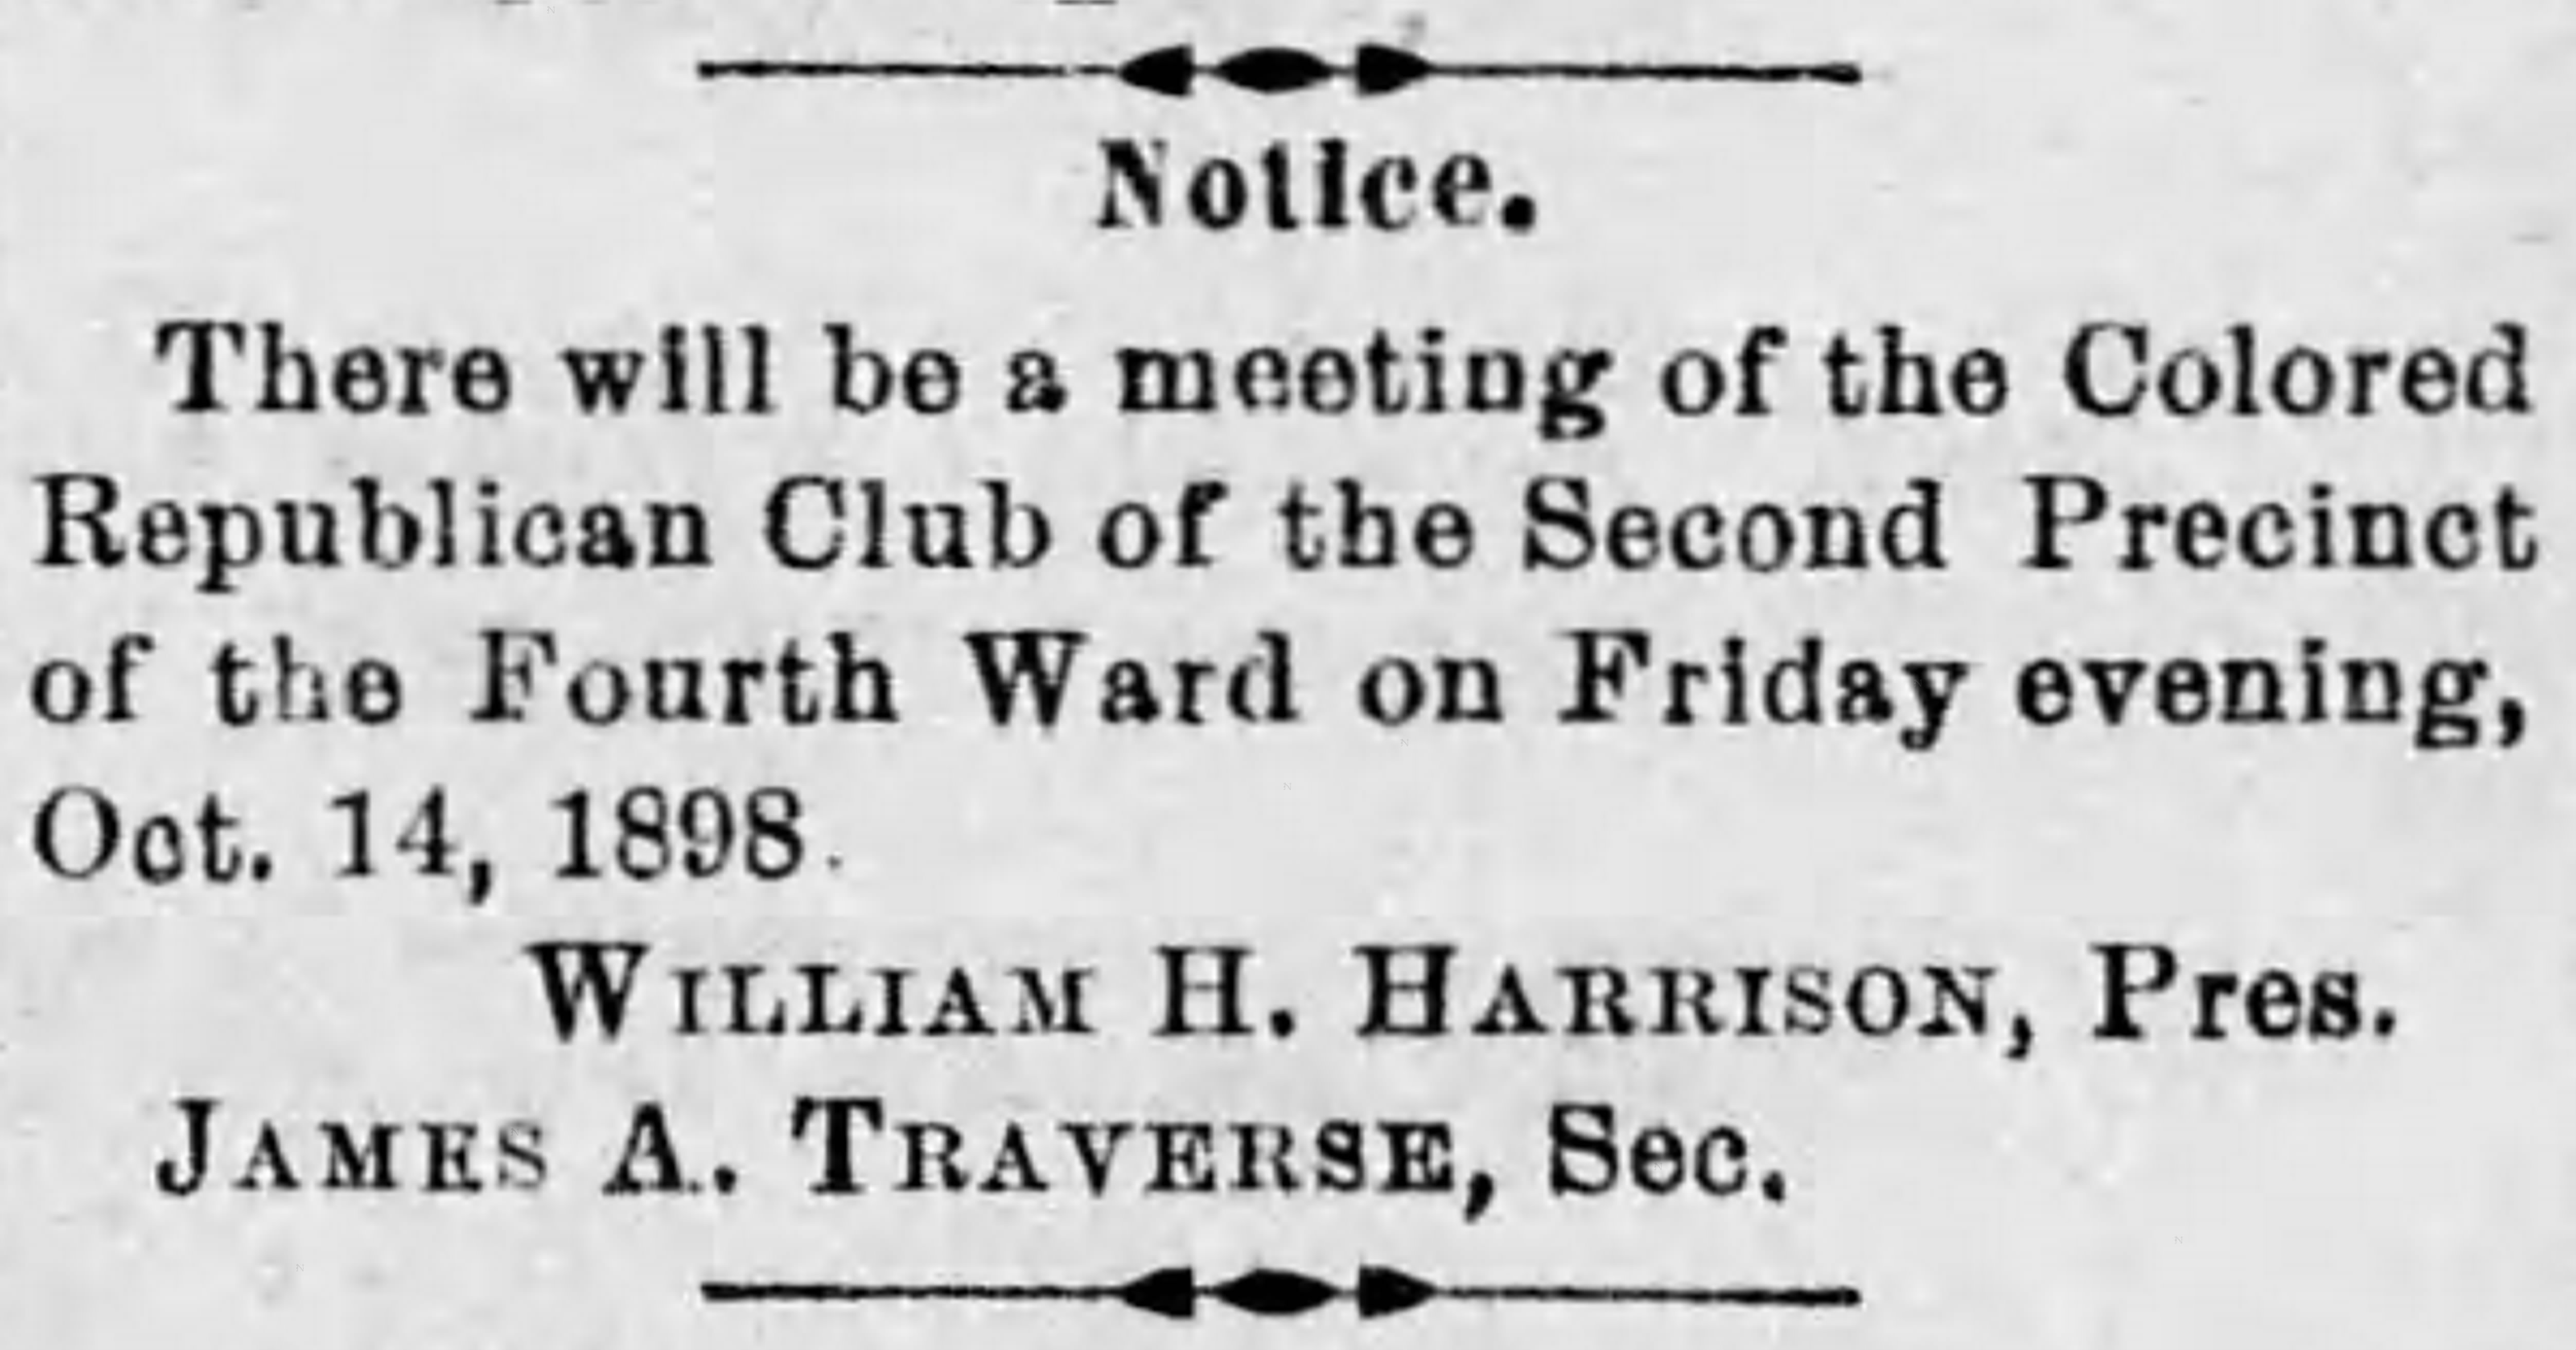 Newspaper notice about a Republican Club meeting, William Harrison is the president. 